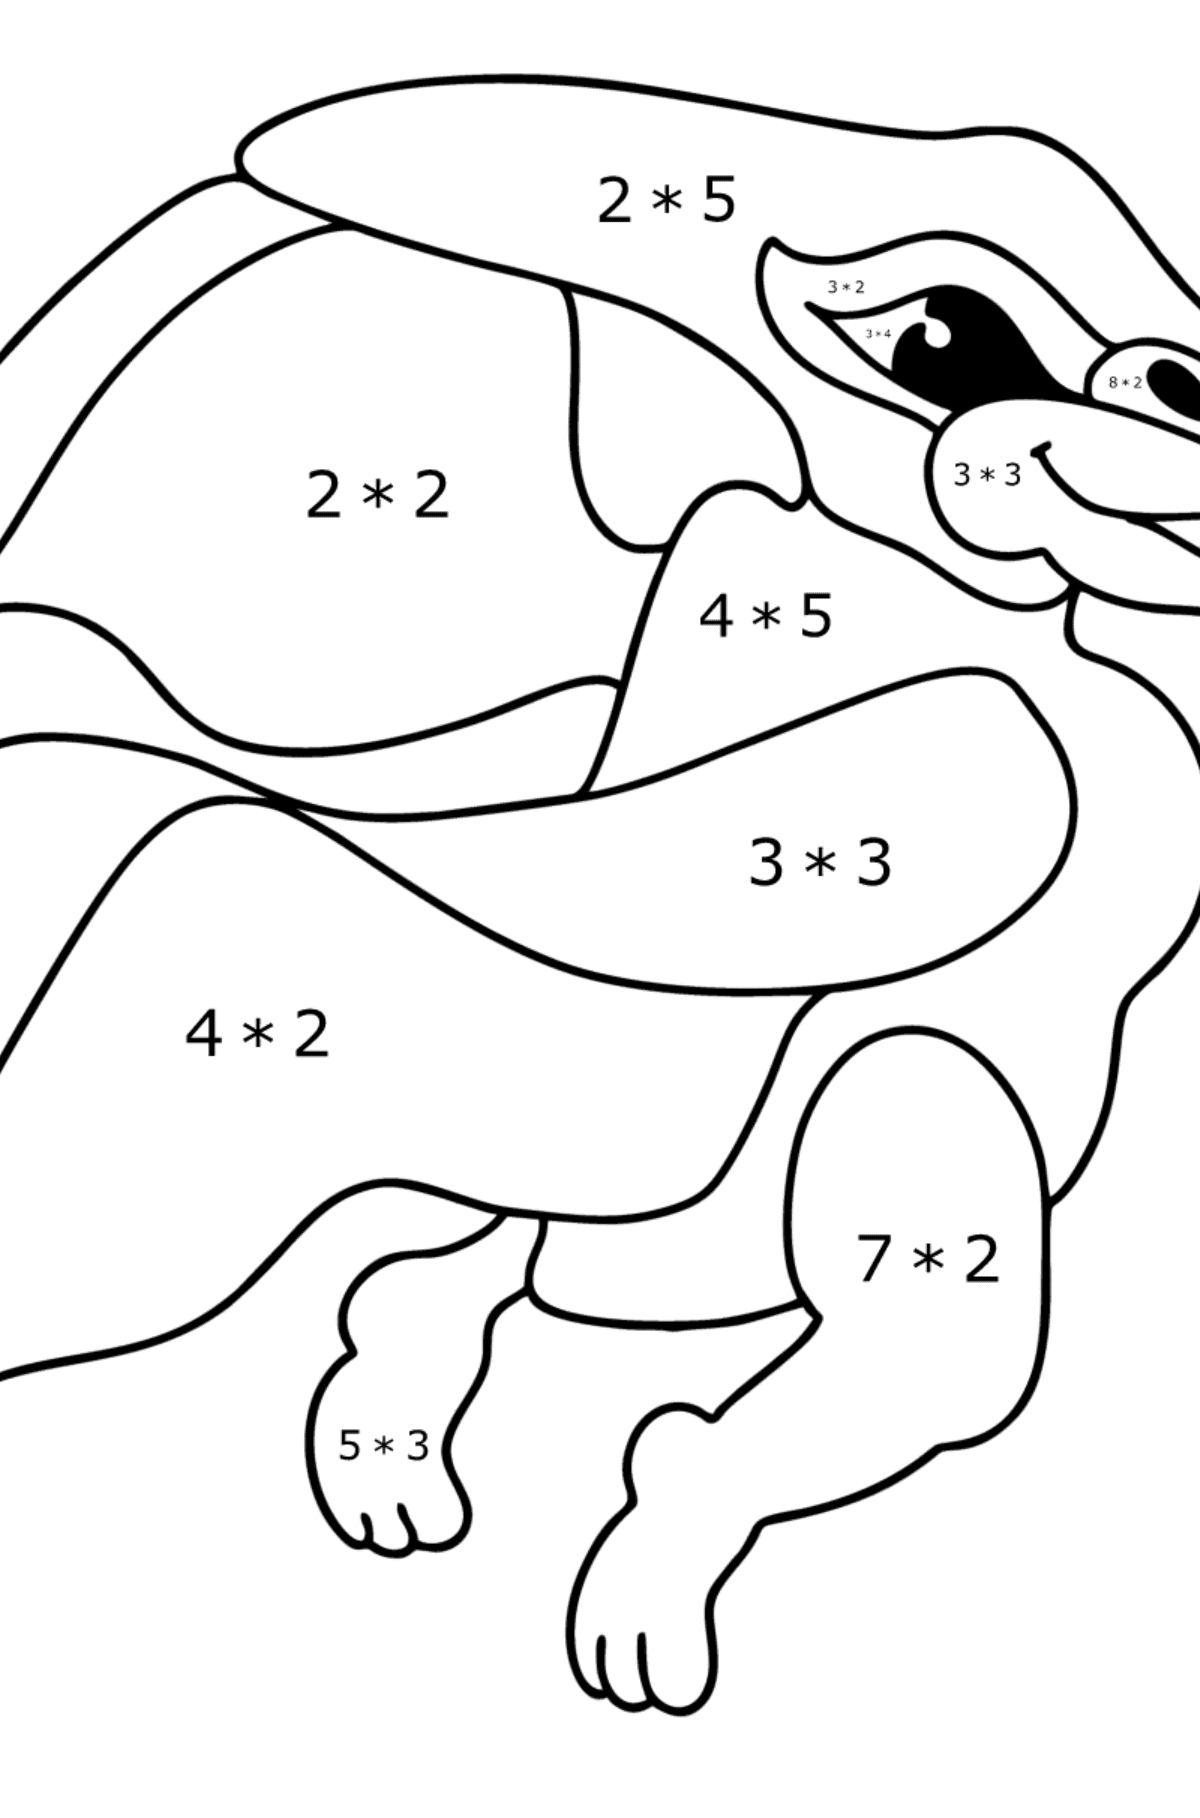 Pteranodon coloring page - Math Coloring - Multiplication for Kids